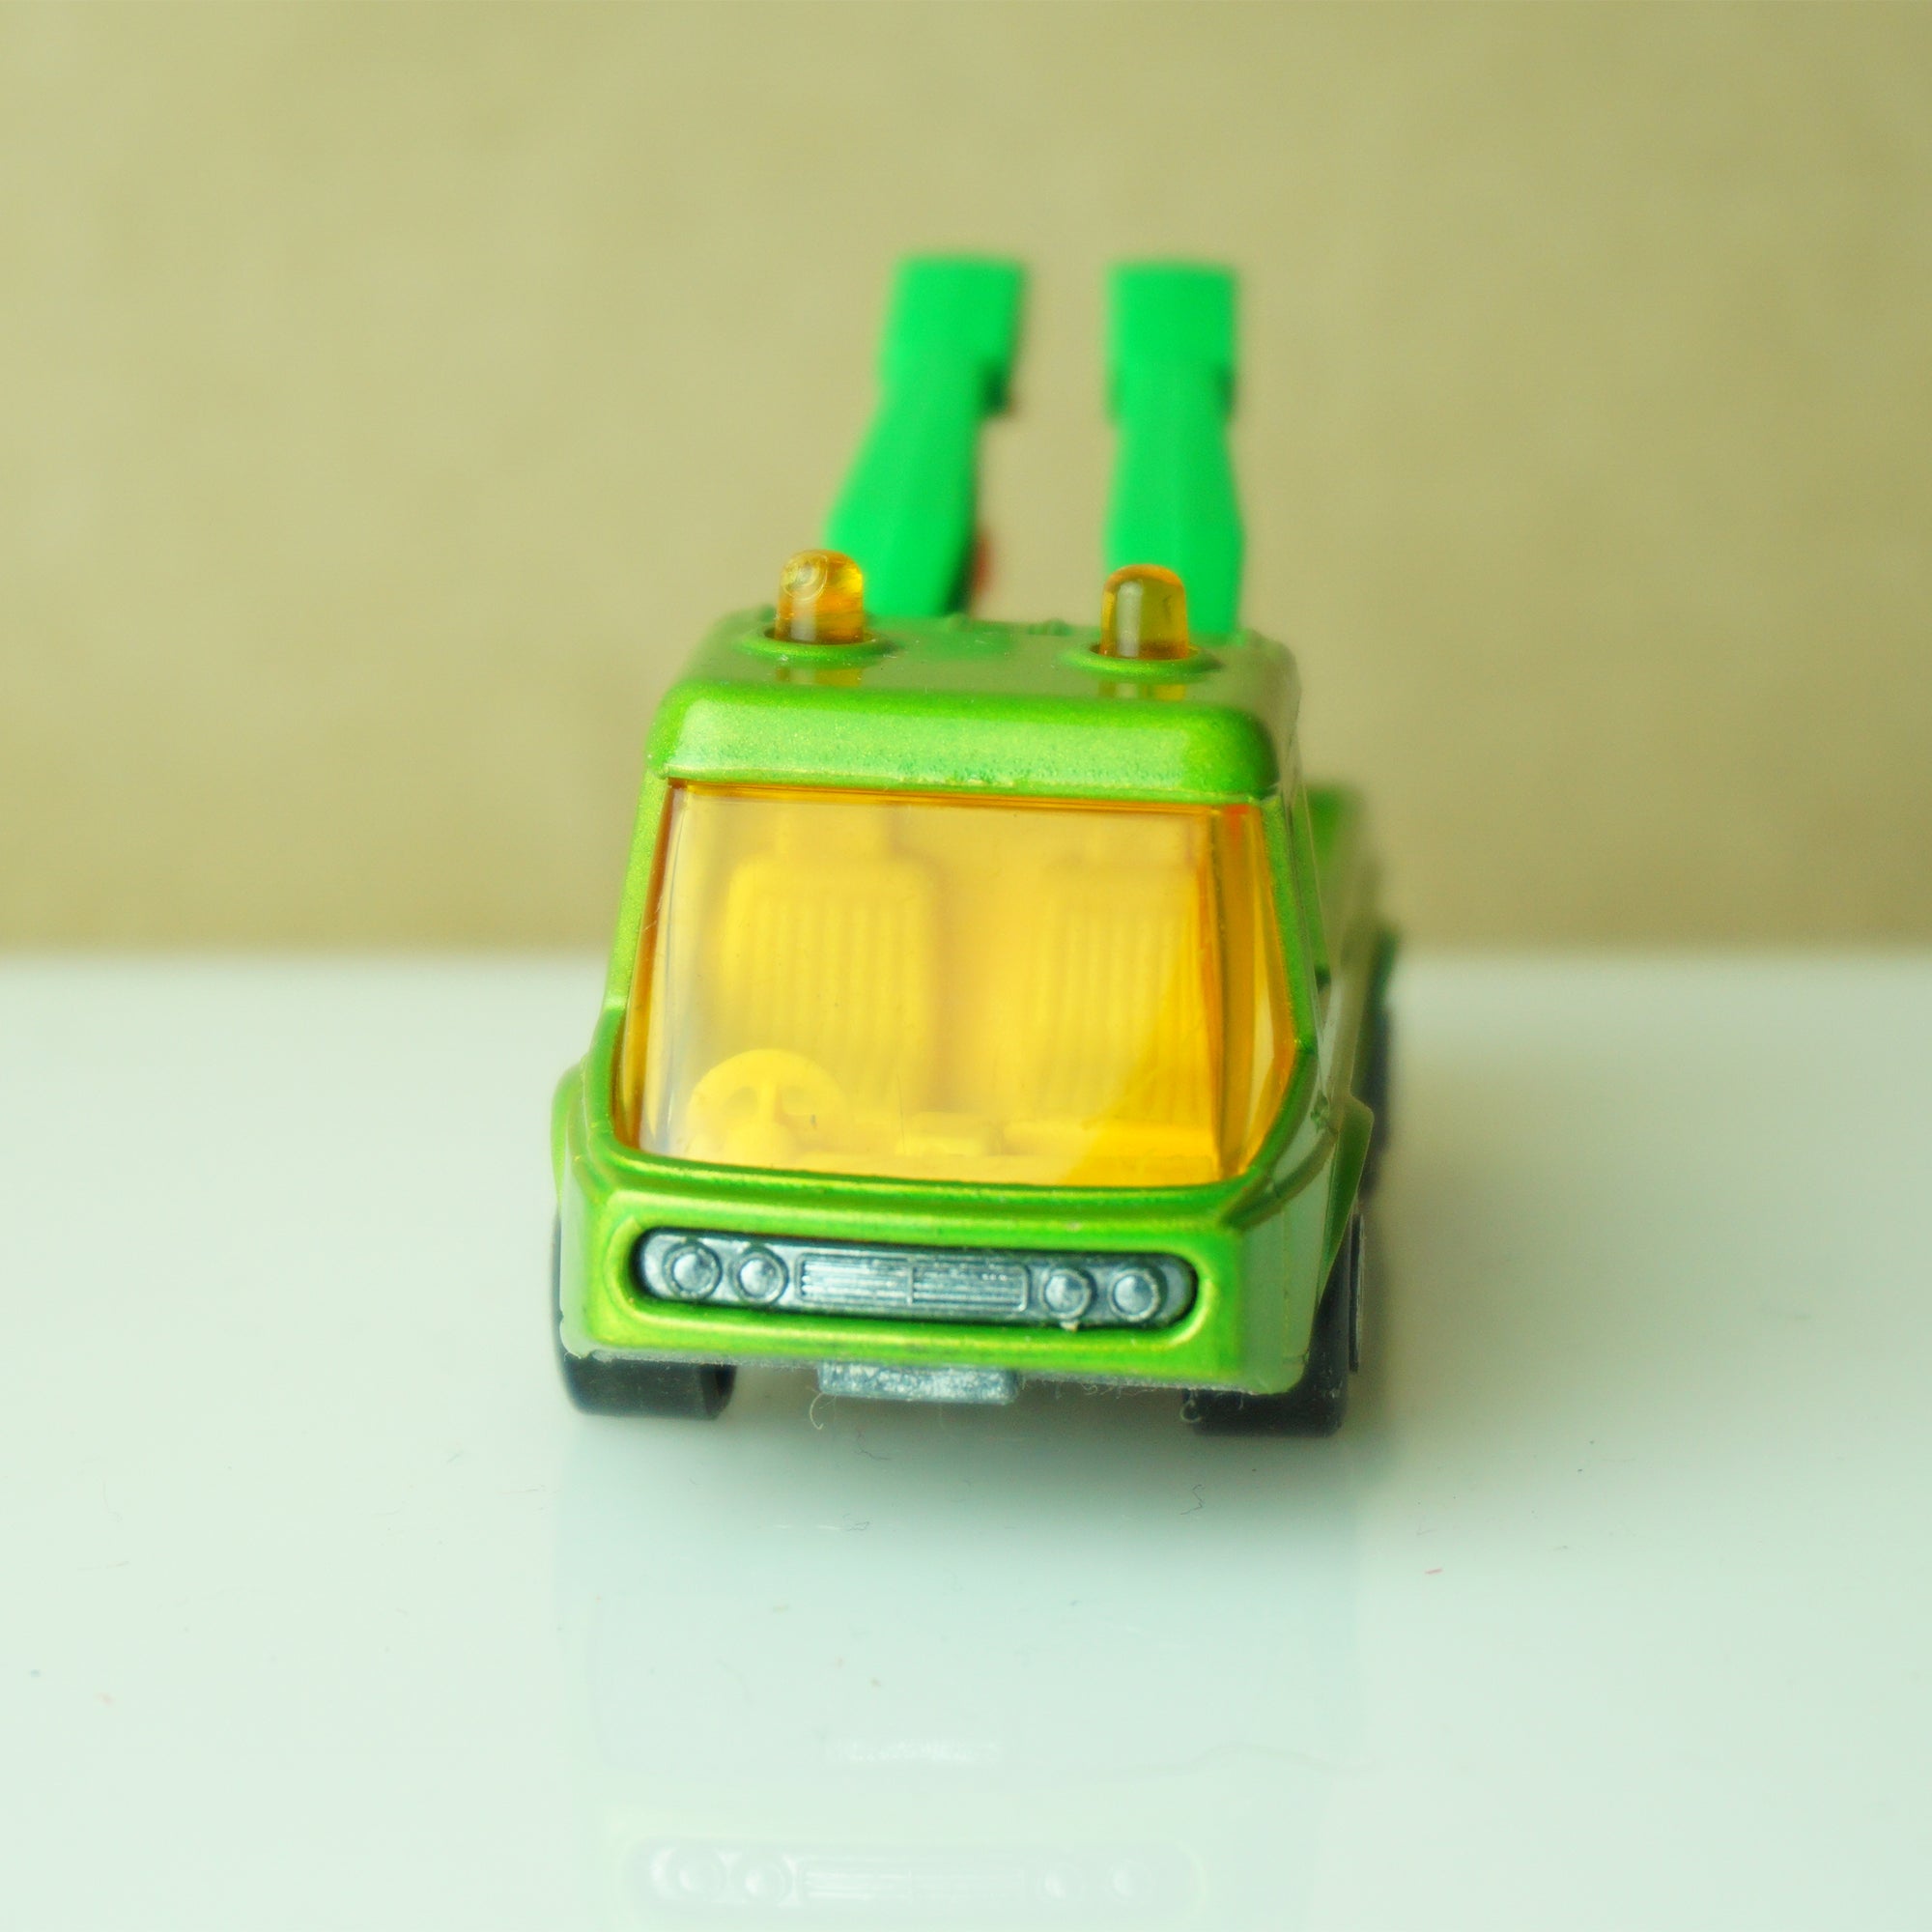 1972 Vintage Diecast MATCHBOX Superfast #74 Toe Joe Neon Green Tow Truck. Made in England by Lesney.